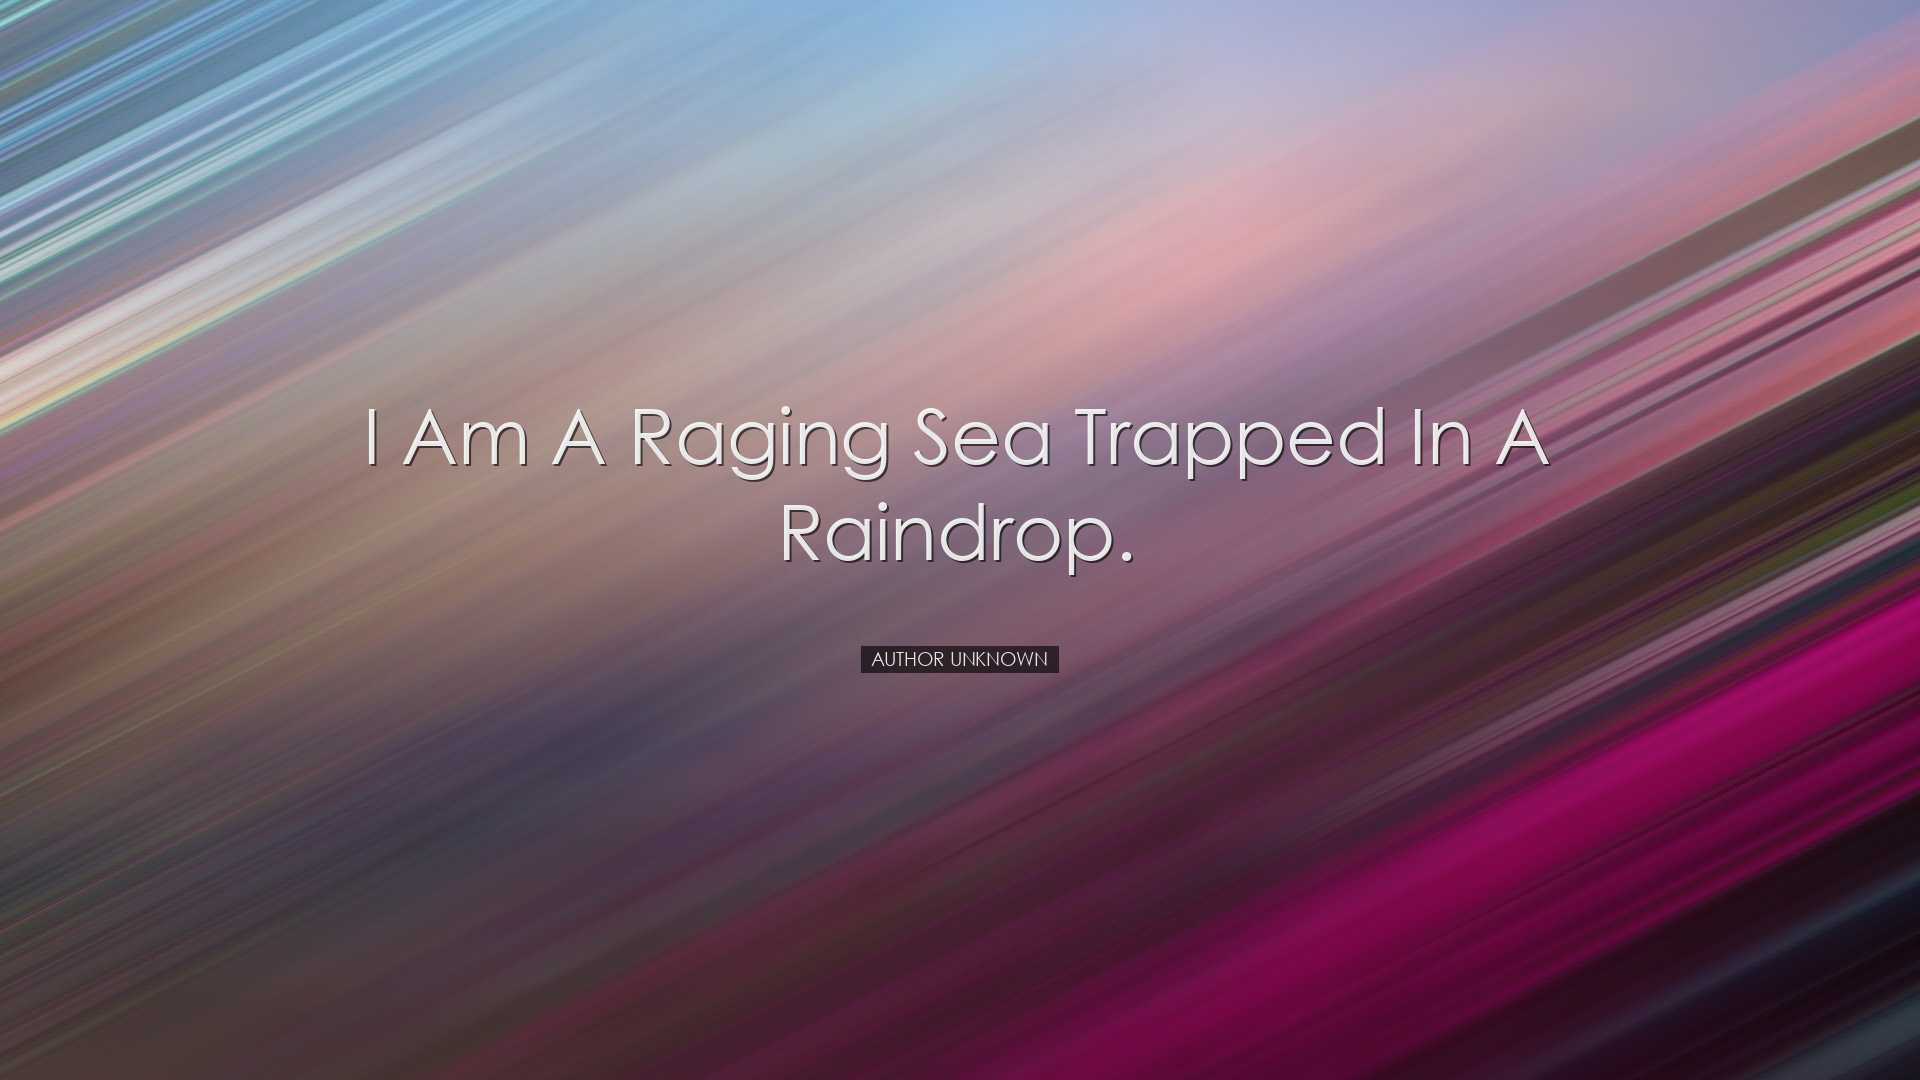 I am a raging sea trapped in a raindrop. - Author unknown